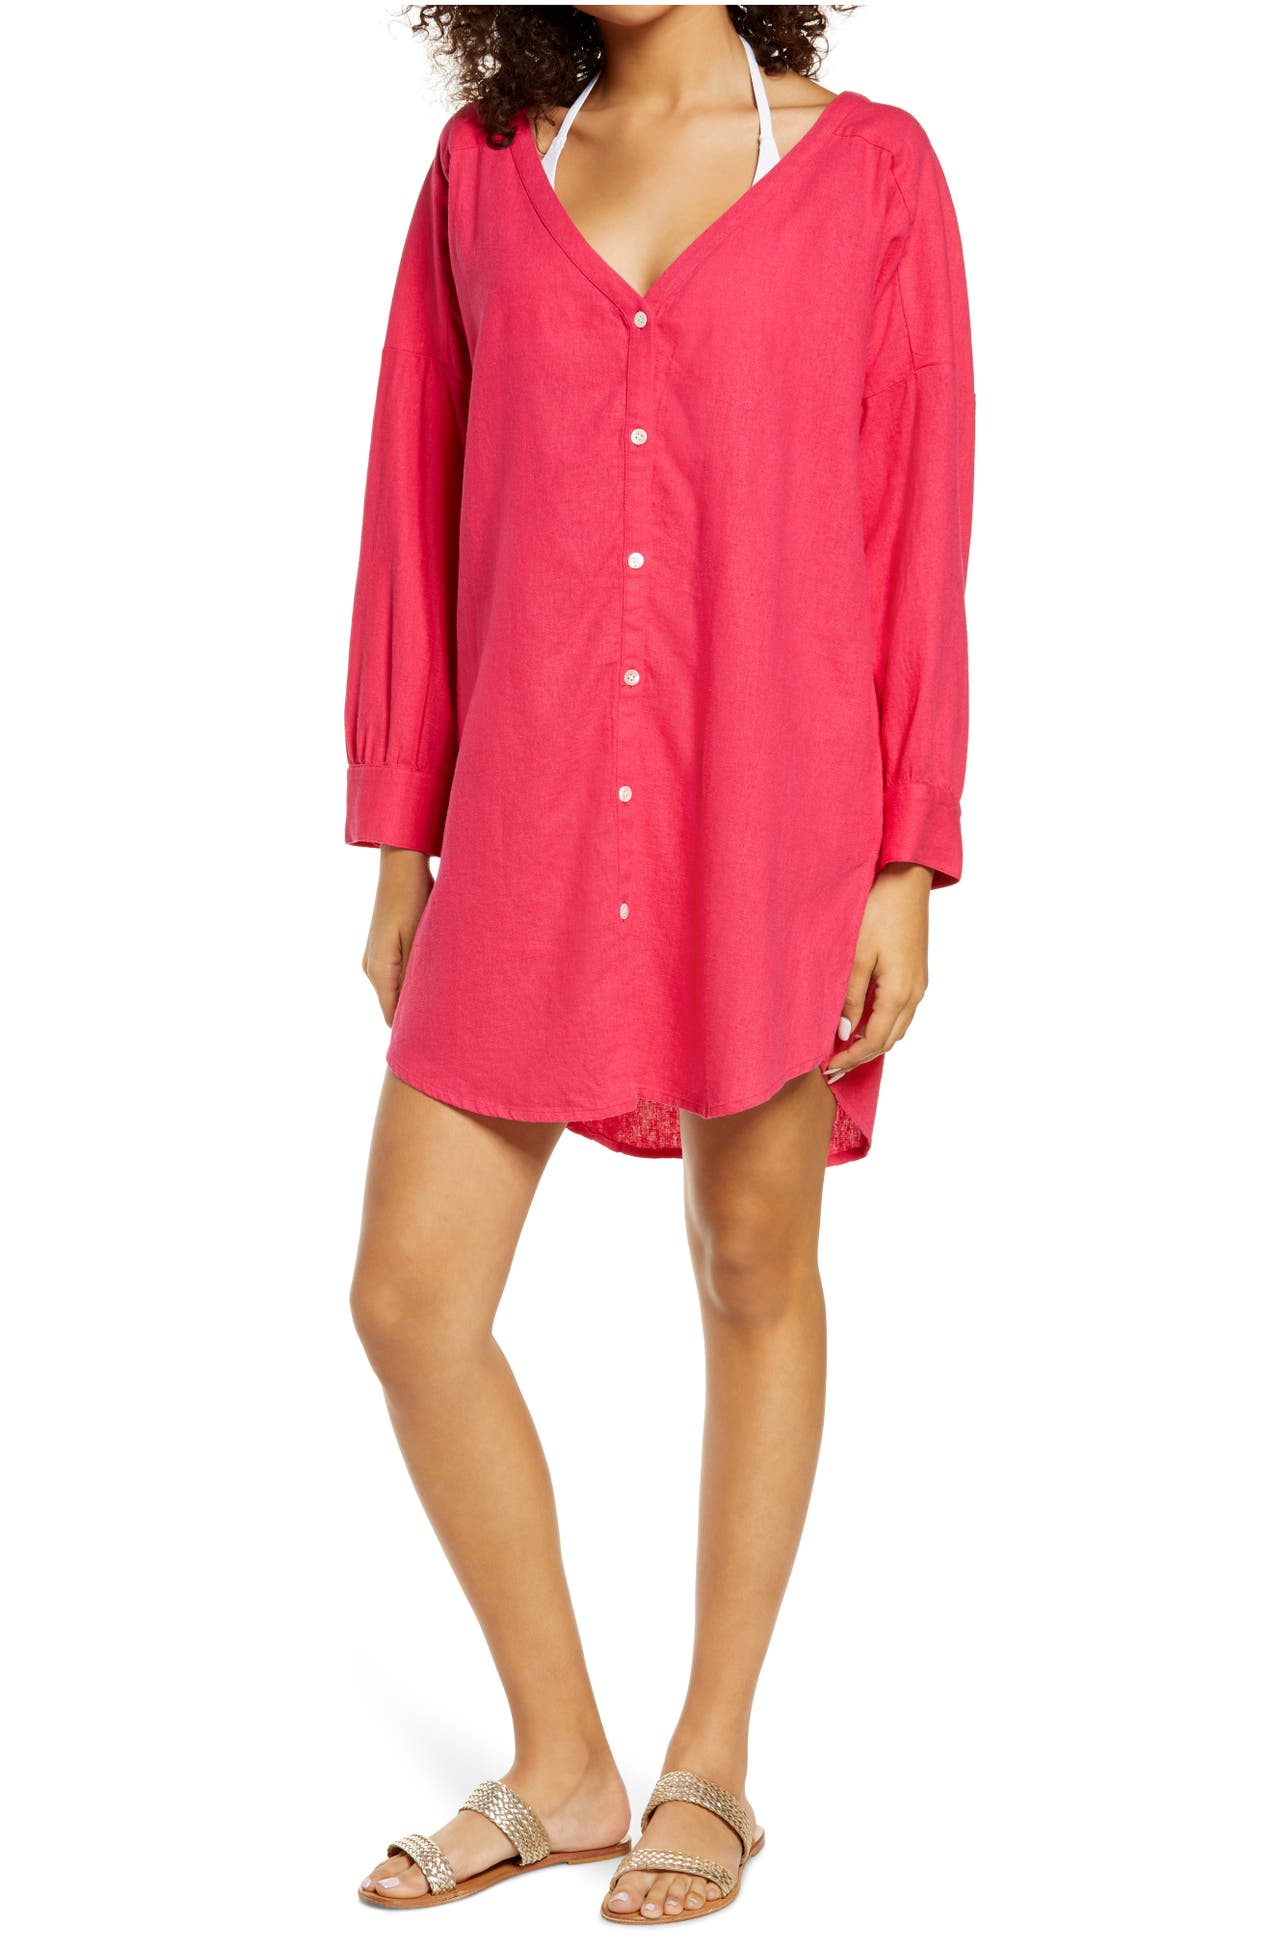 Chelsea28 ButtonUp Cover Up Nordstrom Rack